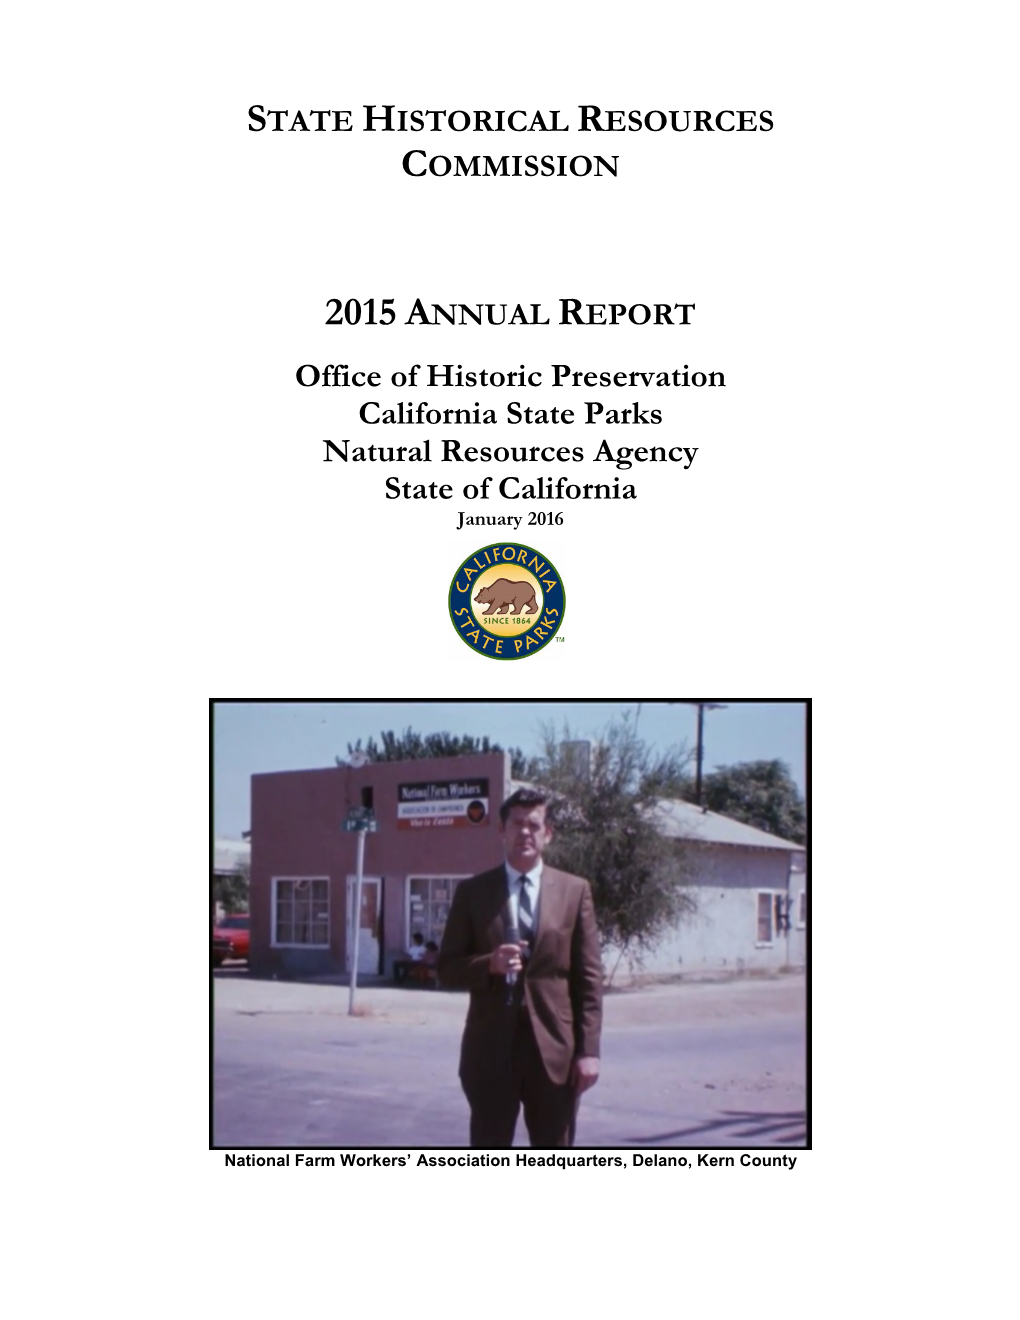 State Historical Resources Commission 2015 Annual Report